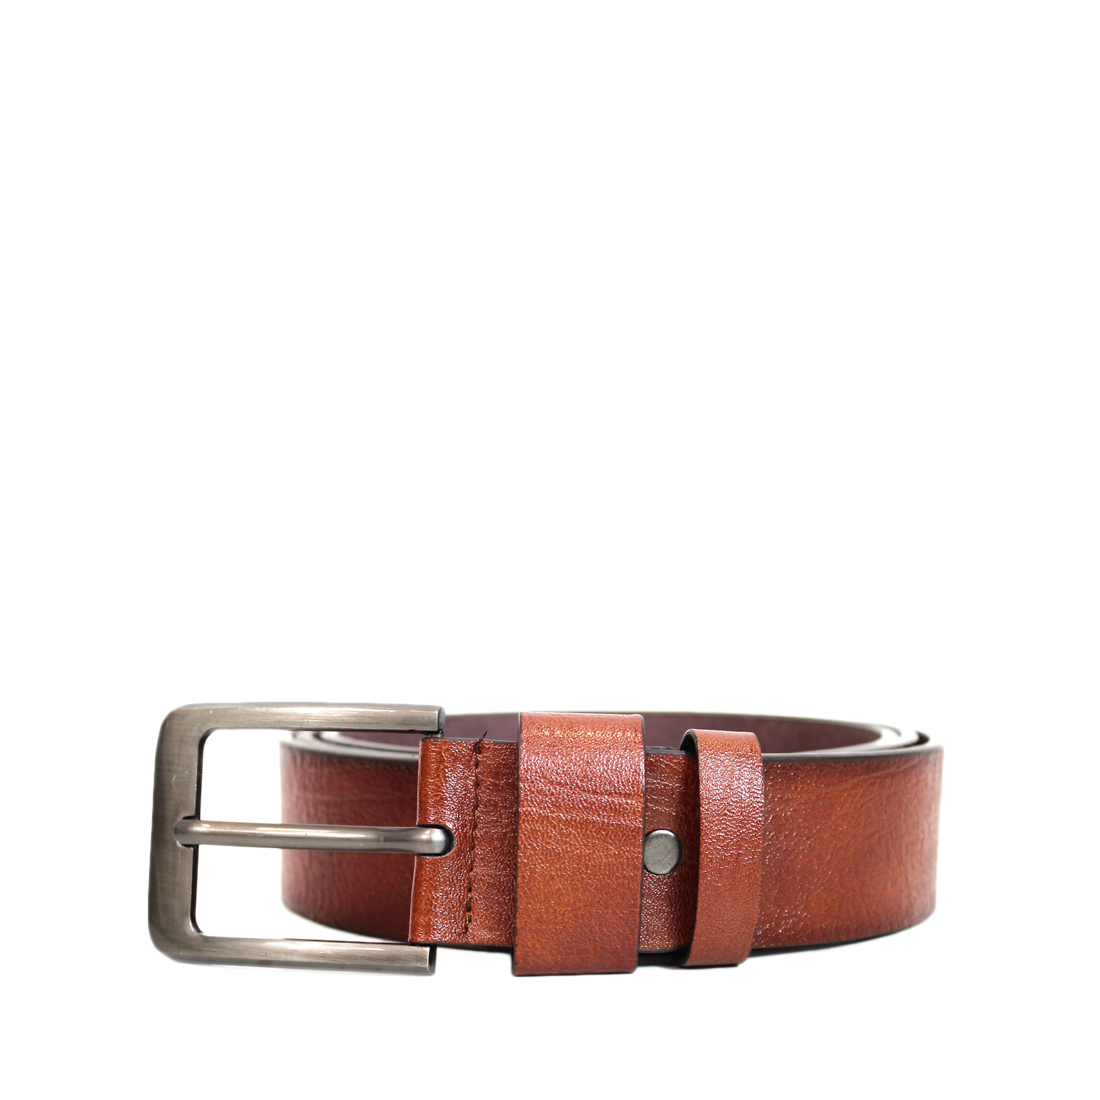 Wide Shiny with rectangular buckle